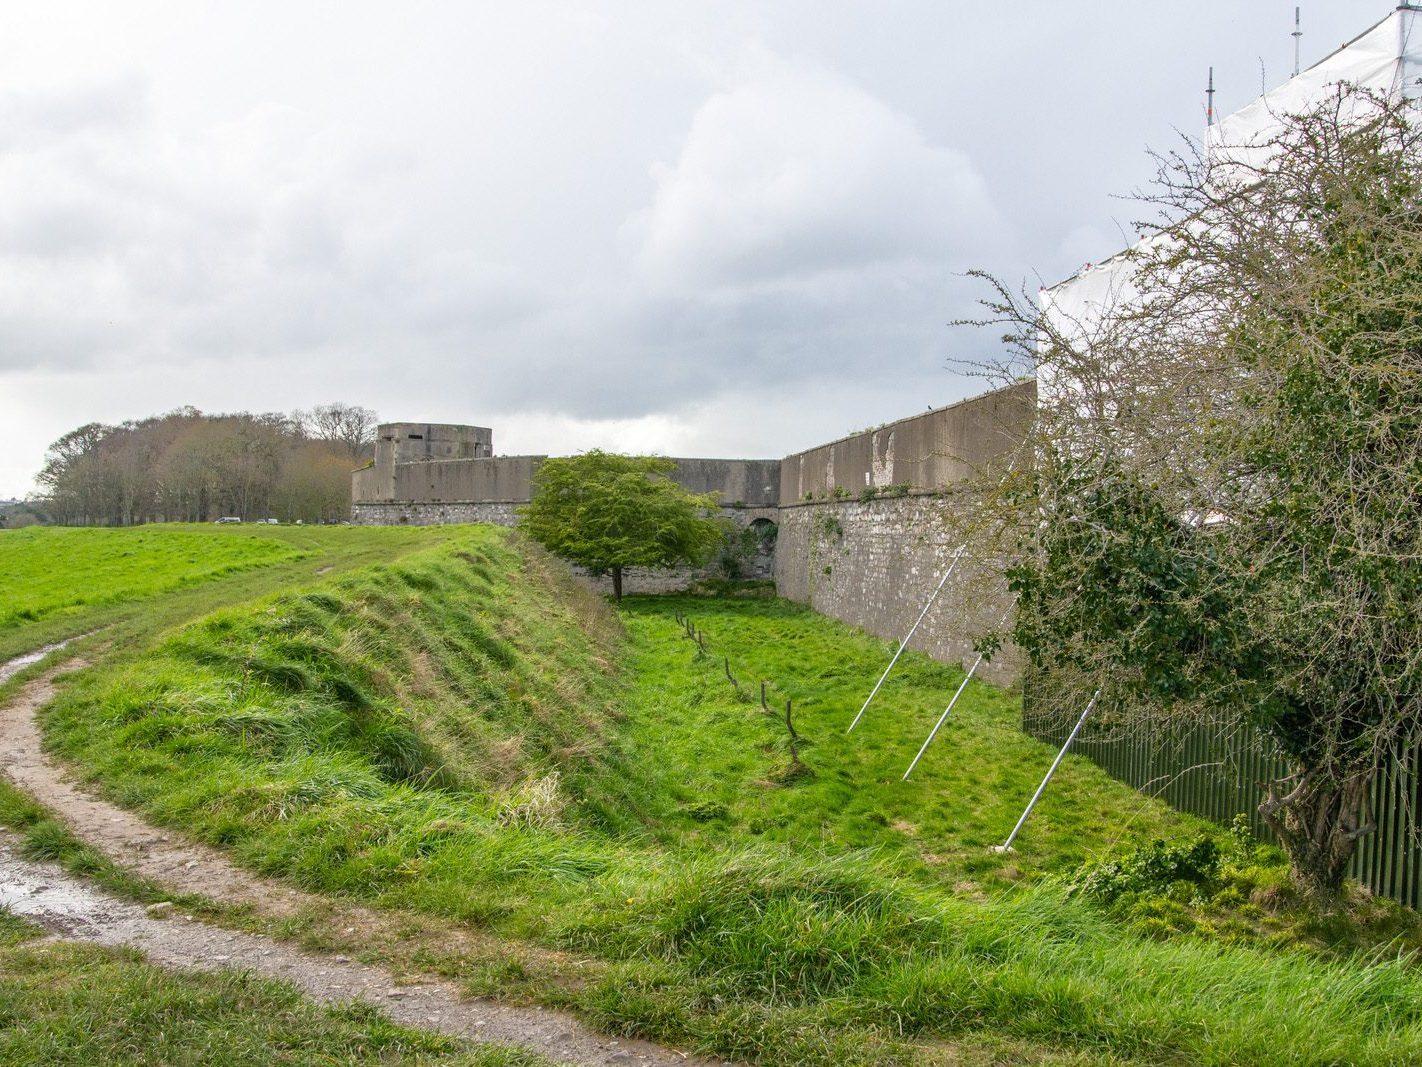 THE MAGAZINE FORT IN PHOENIX PARK [THERE IS MUCH INFORMATION AND A COMPLICATED STORY]-223511-1